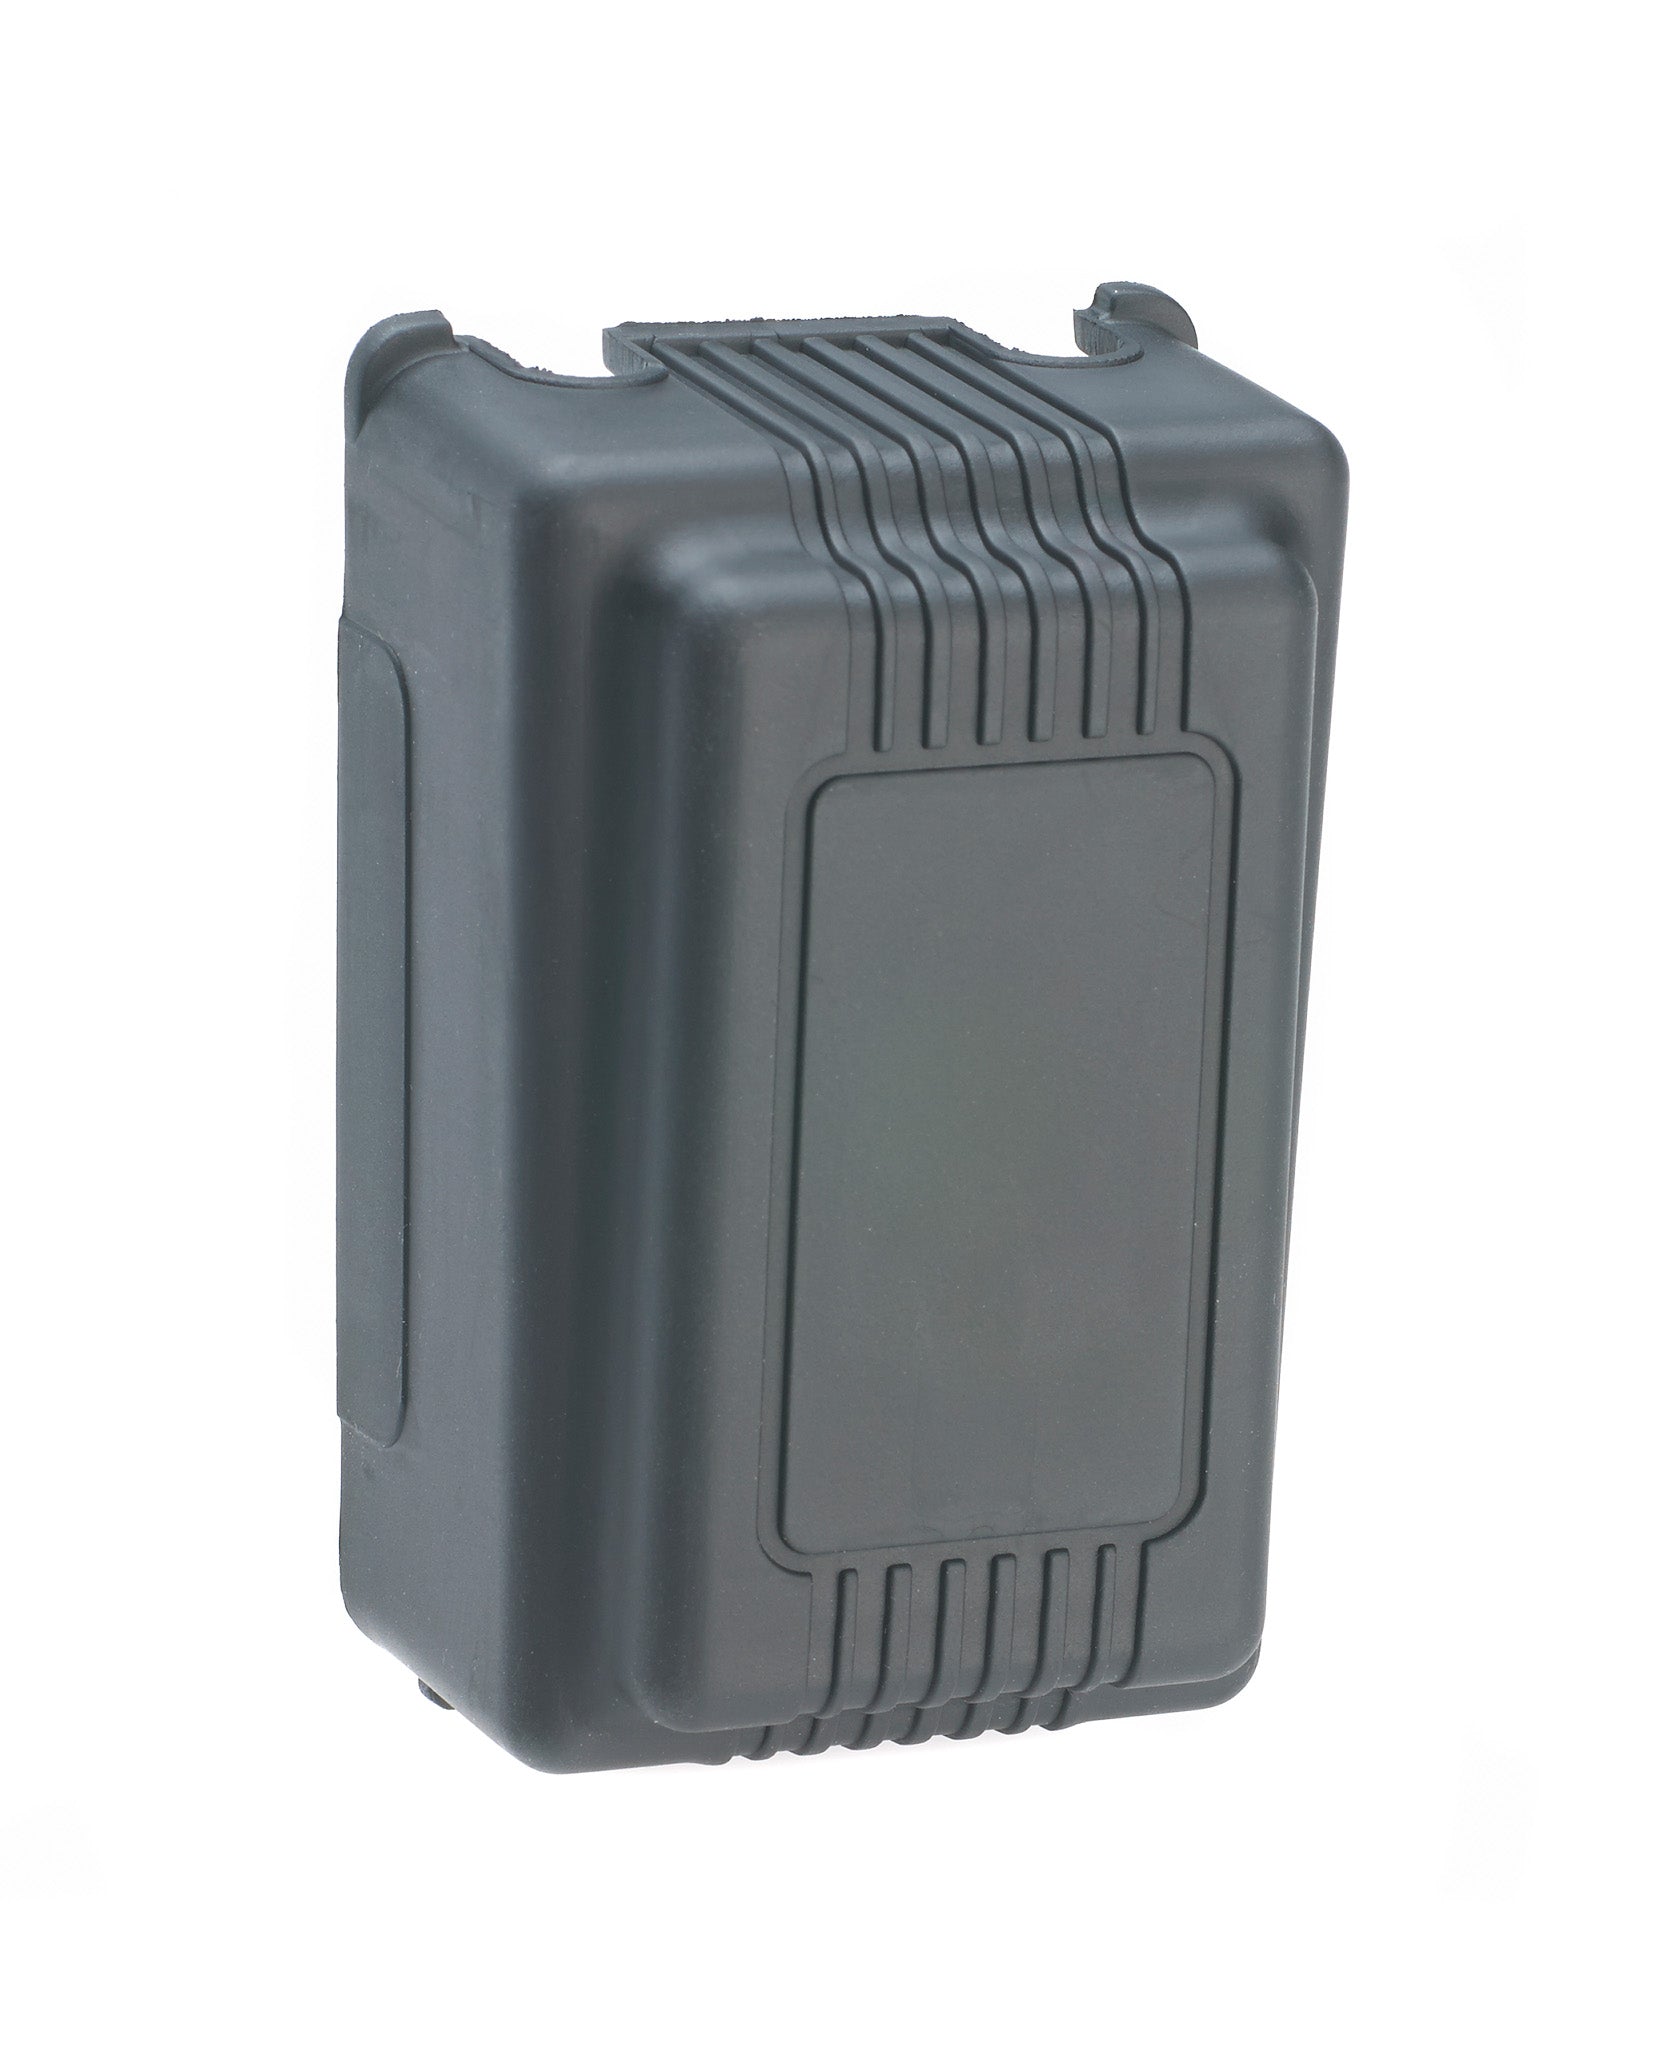 Black plastic weather cover for Supra Portable key safe from The Key Safe Company